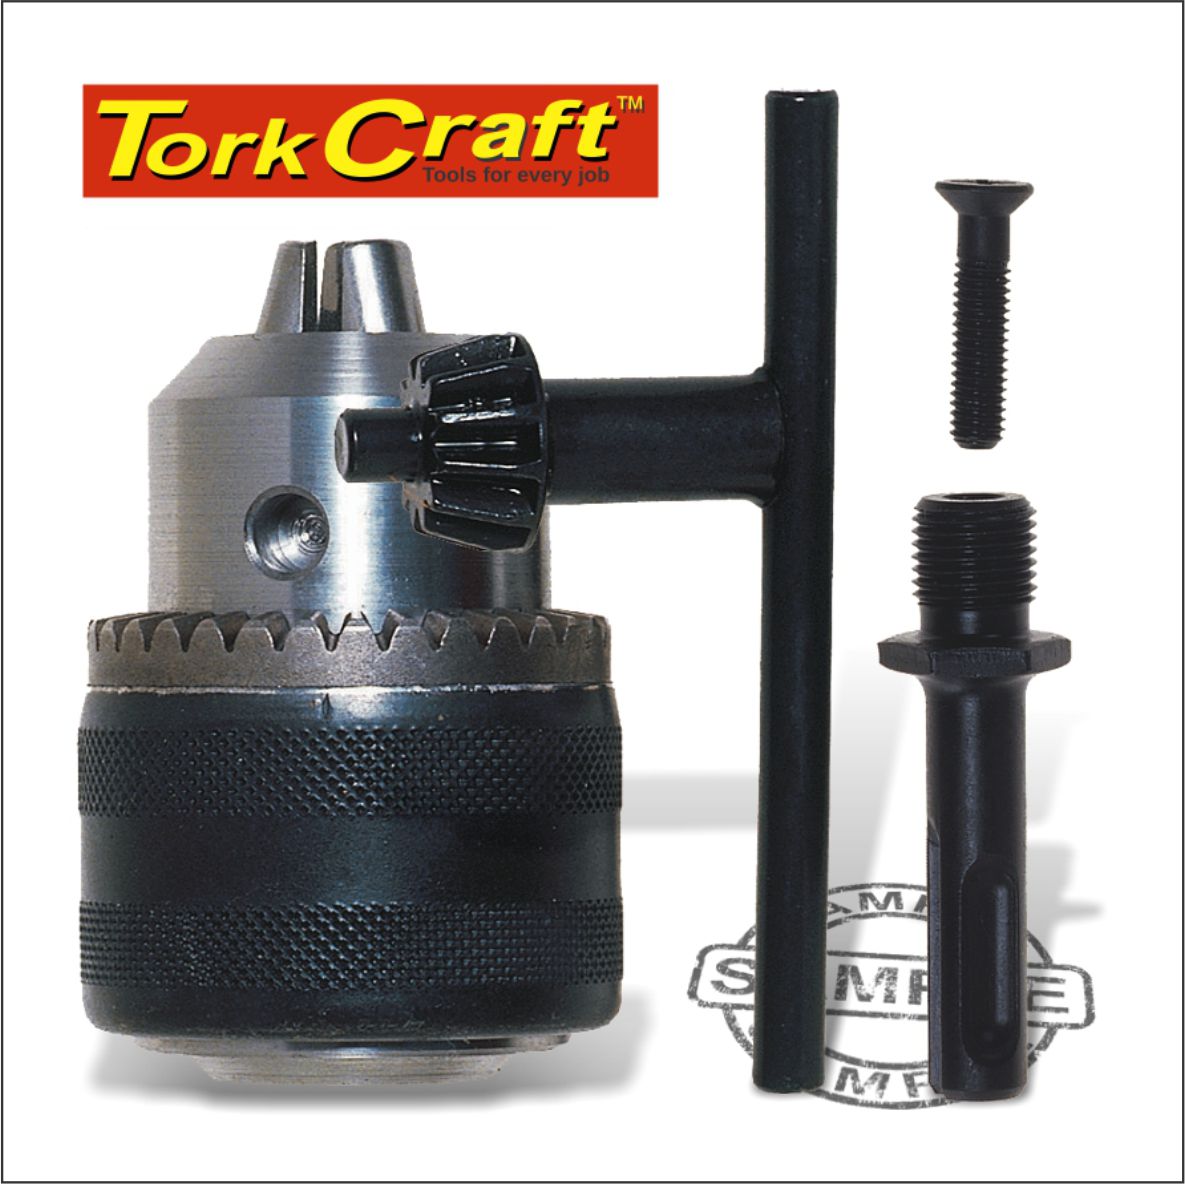 13mm 1/2" UNF Replacement Drill CHUCK with Chuck Key For Drills 